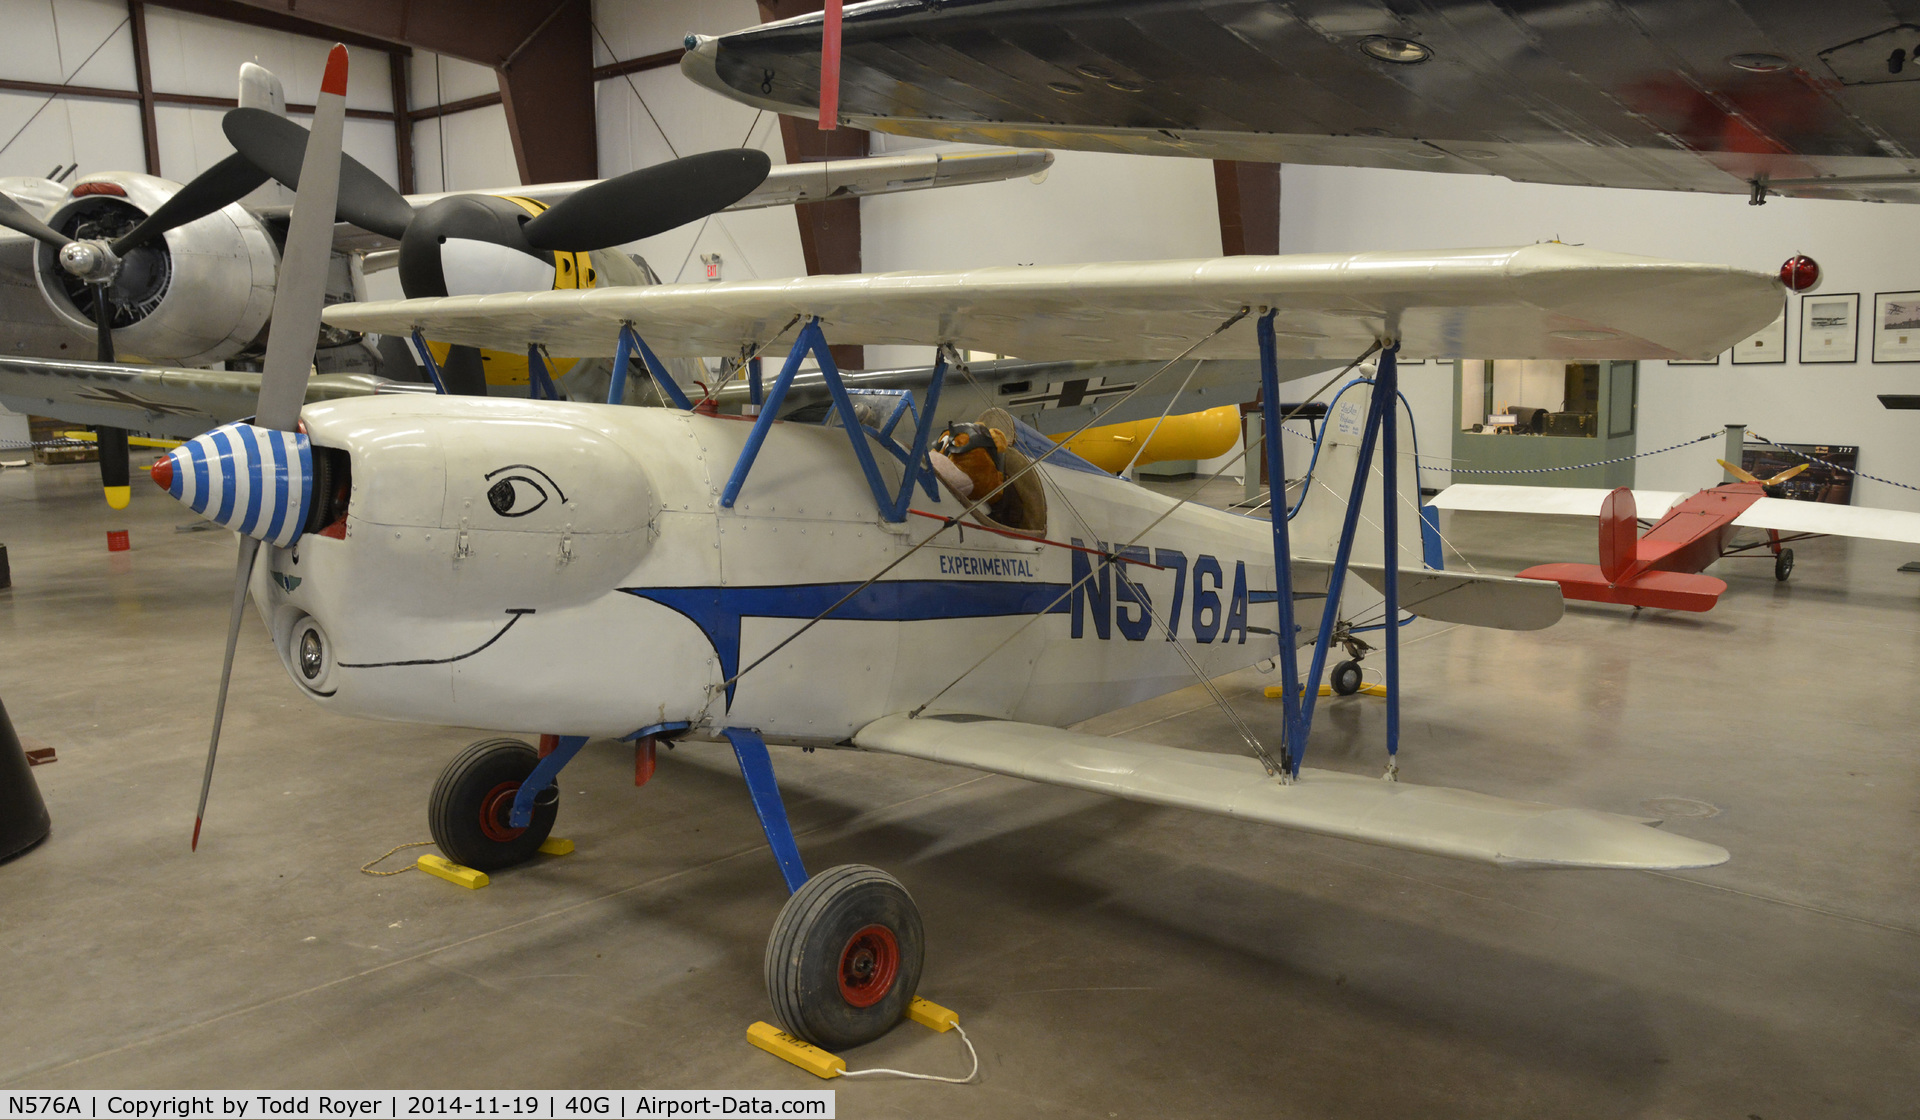 N576A, 1964 Bretthauer Lewann Biplane DD-1 C/N 1, On display at the Planes of Fame Valle location